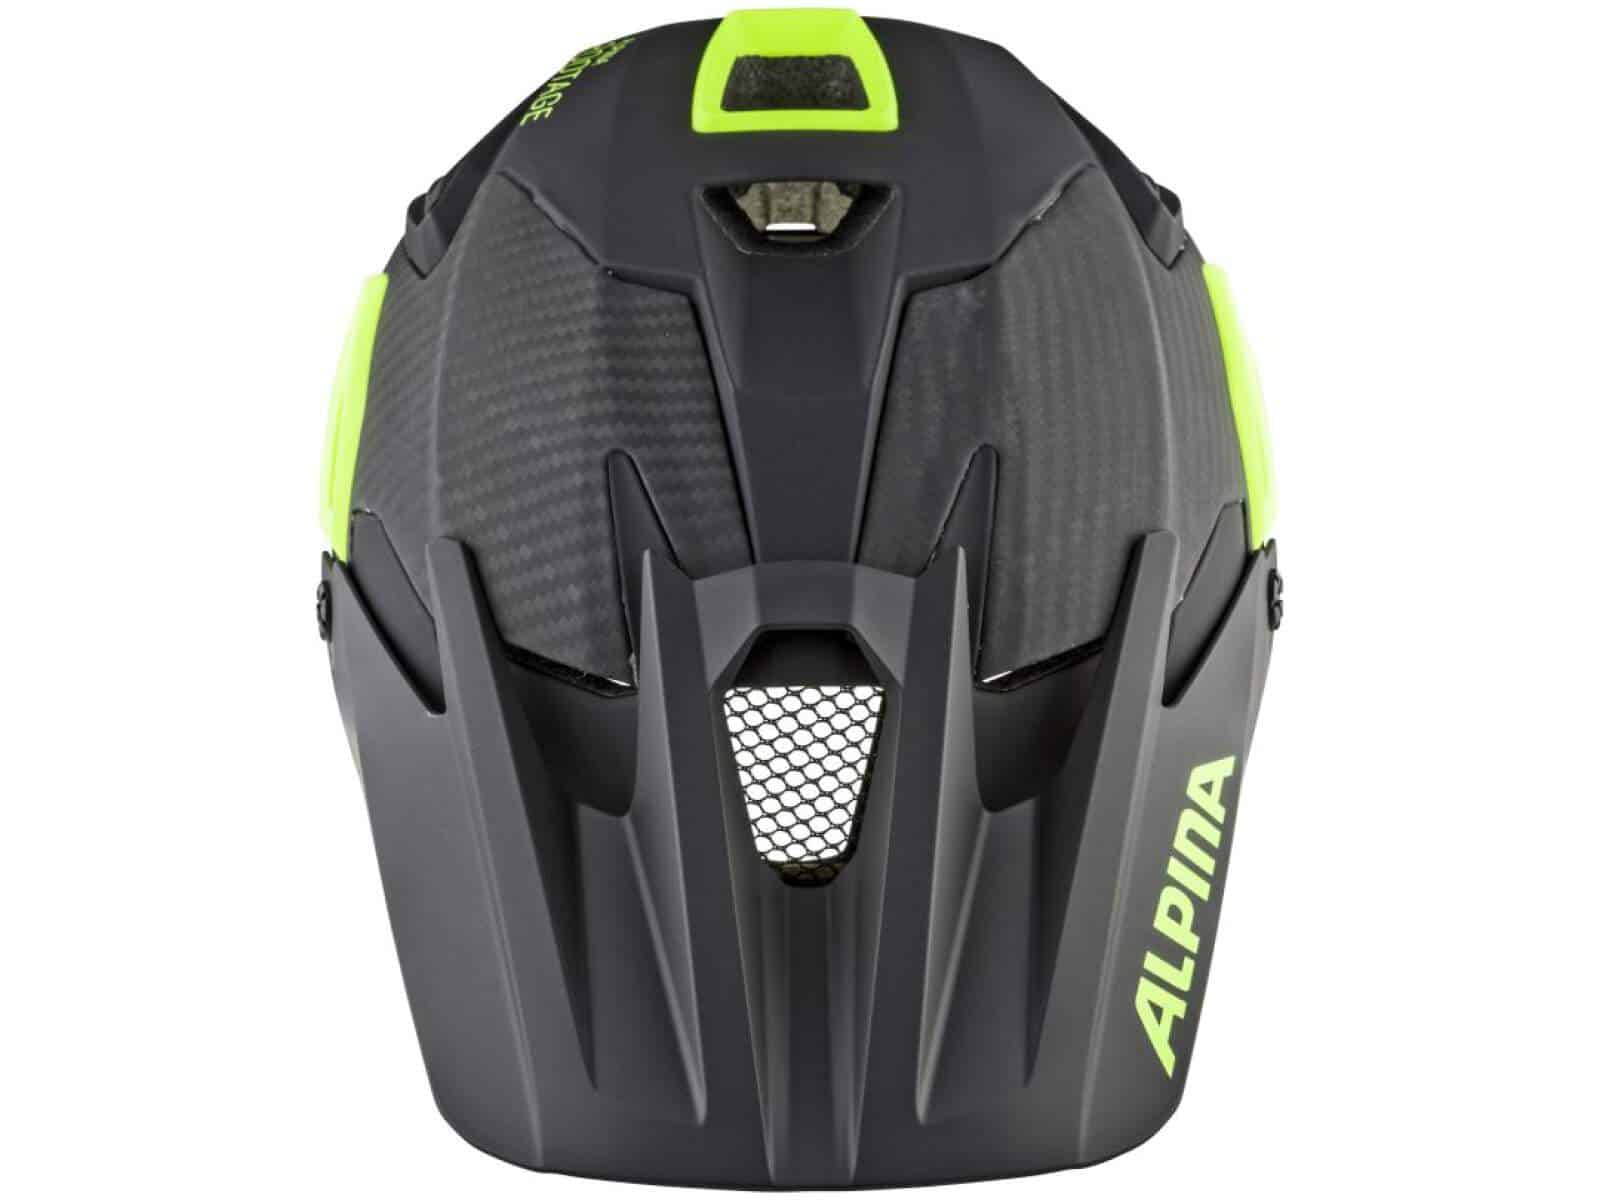 Kask rowerowy Alpina ROOTAGE